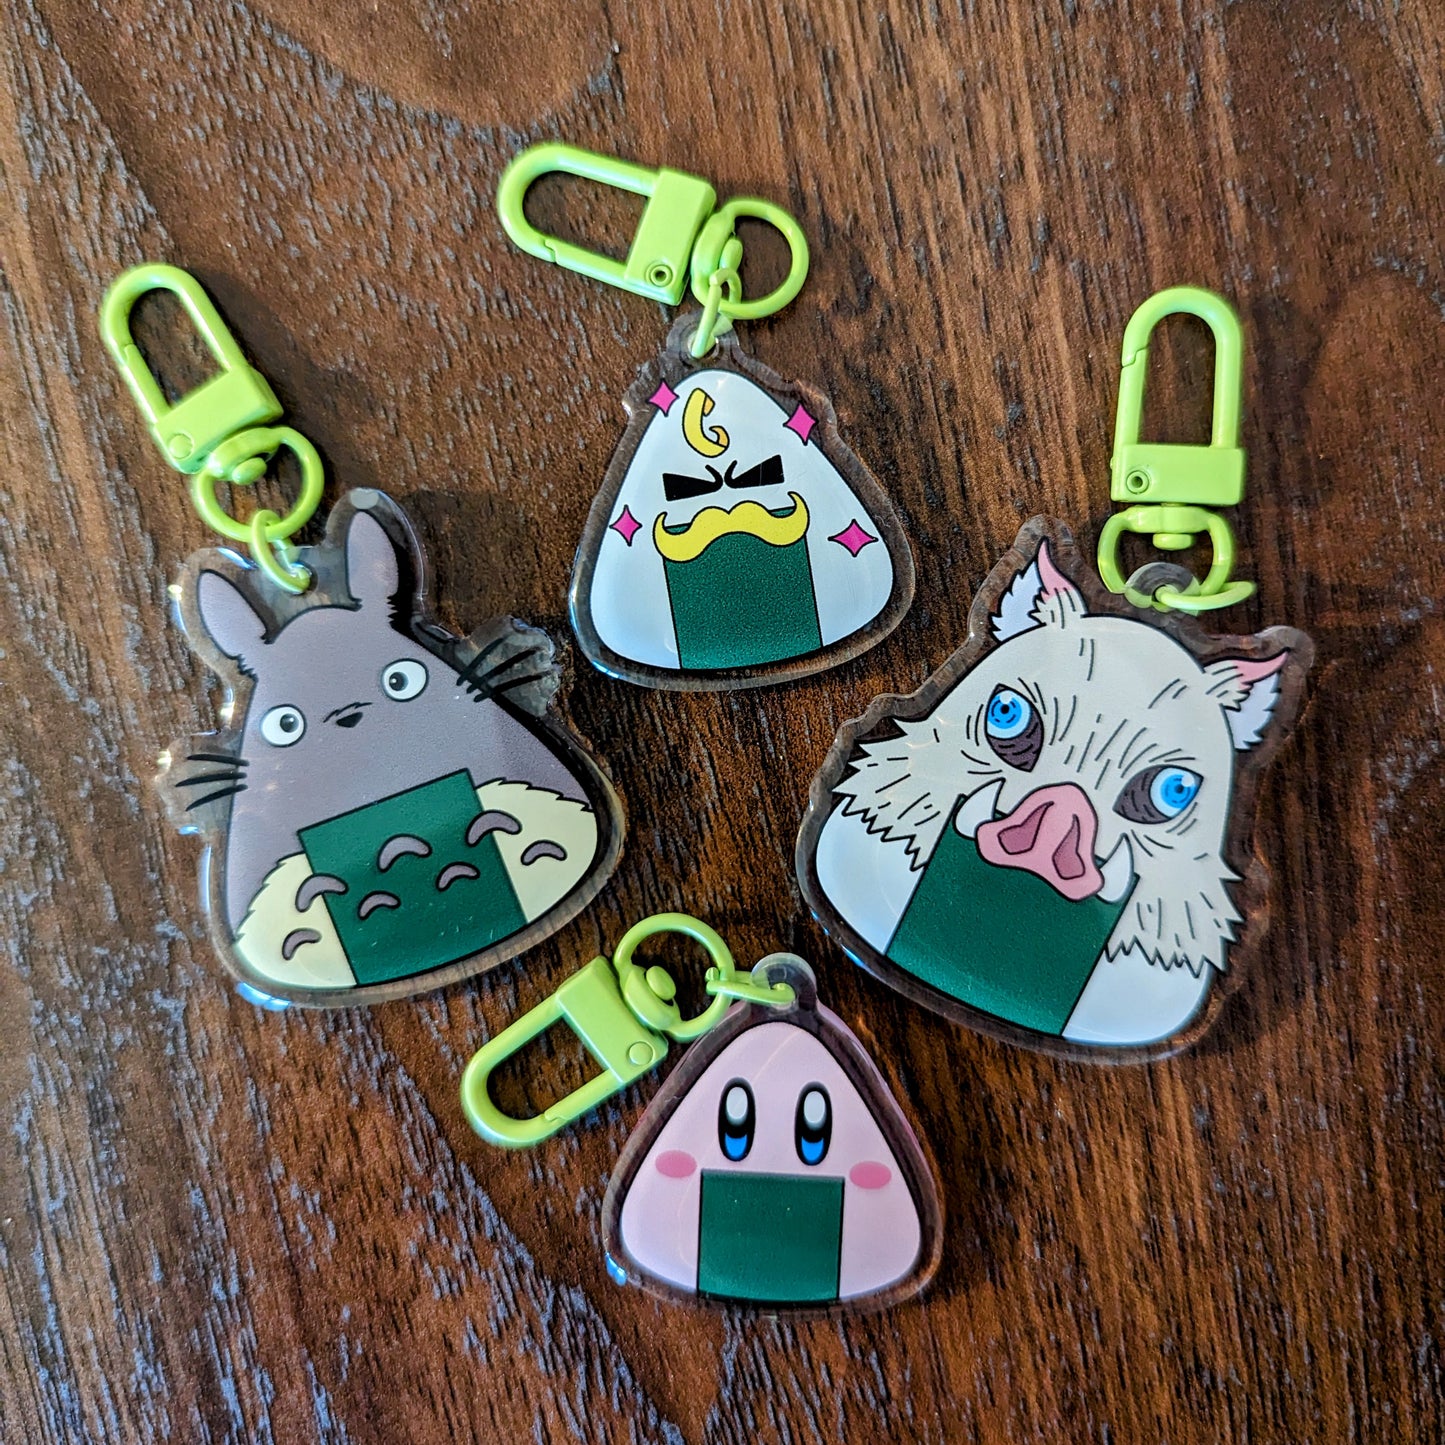 Acrylic Charms / Keychains (multiple designs)